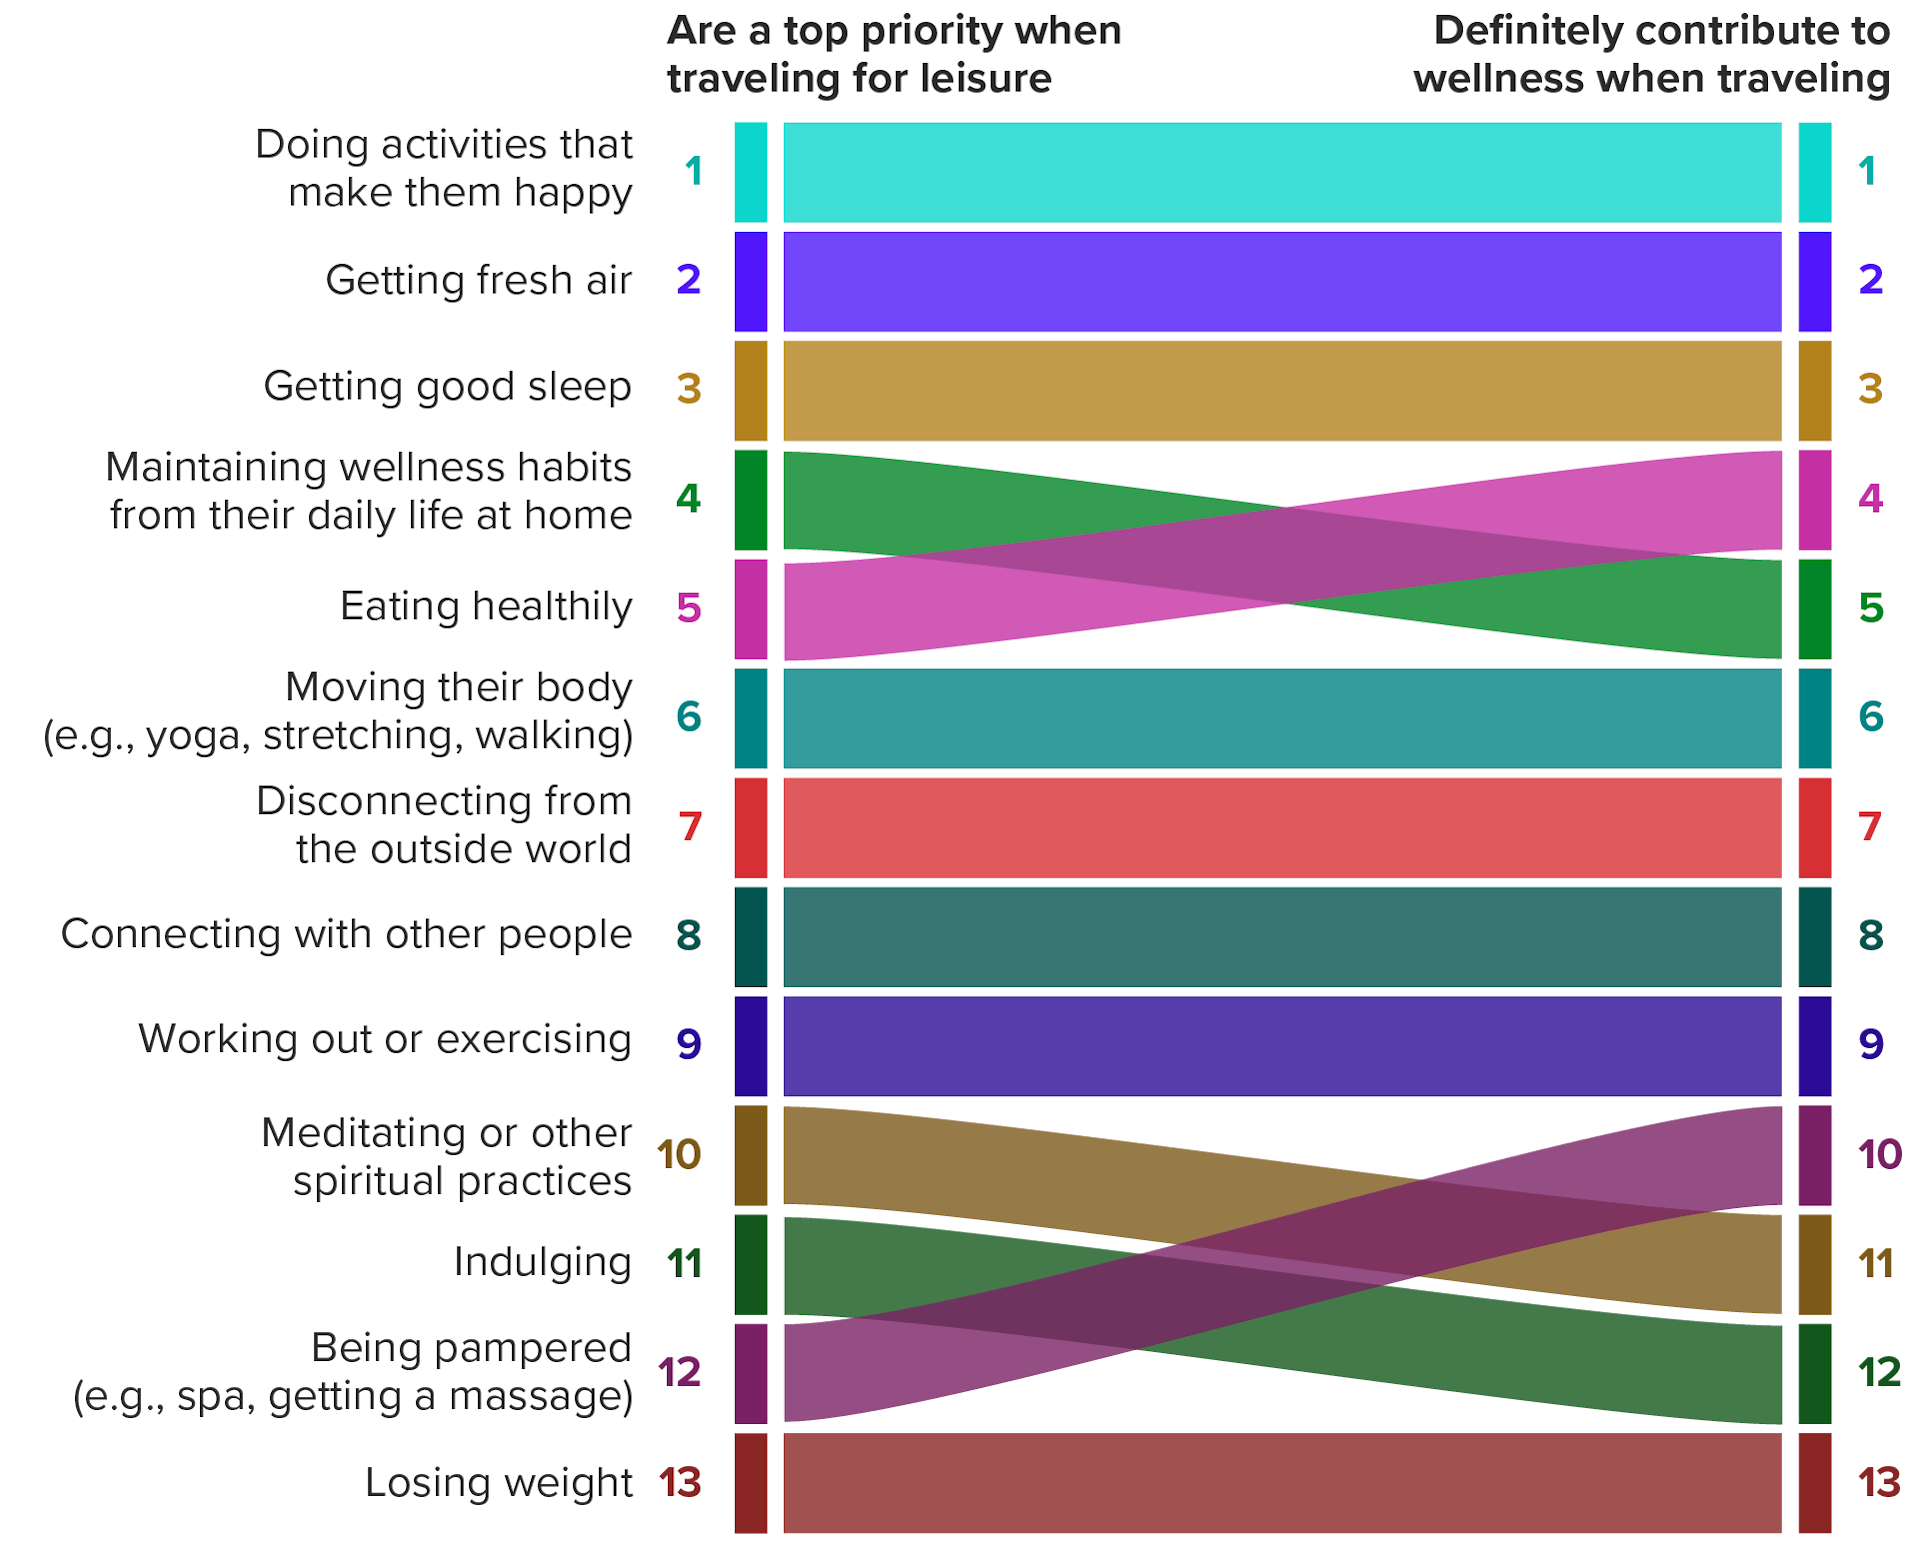 Chart of the rank order of activities travelers said are a top priority when traveling for leisure and definitely contribute to wellness when traveling. From working out to getting pampered to meditating, stereotypical wellness activities fall toward the bottom of the list of things travelers actually want to do, and also the list of things they see as supporting their overall well-being.